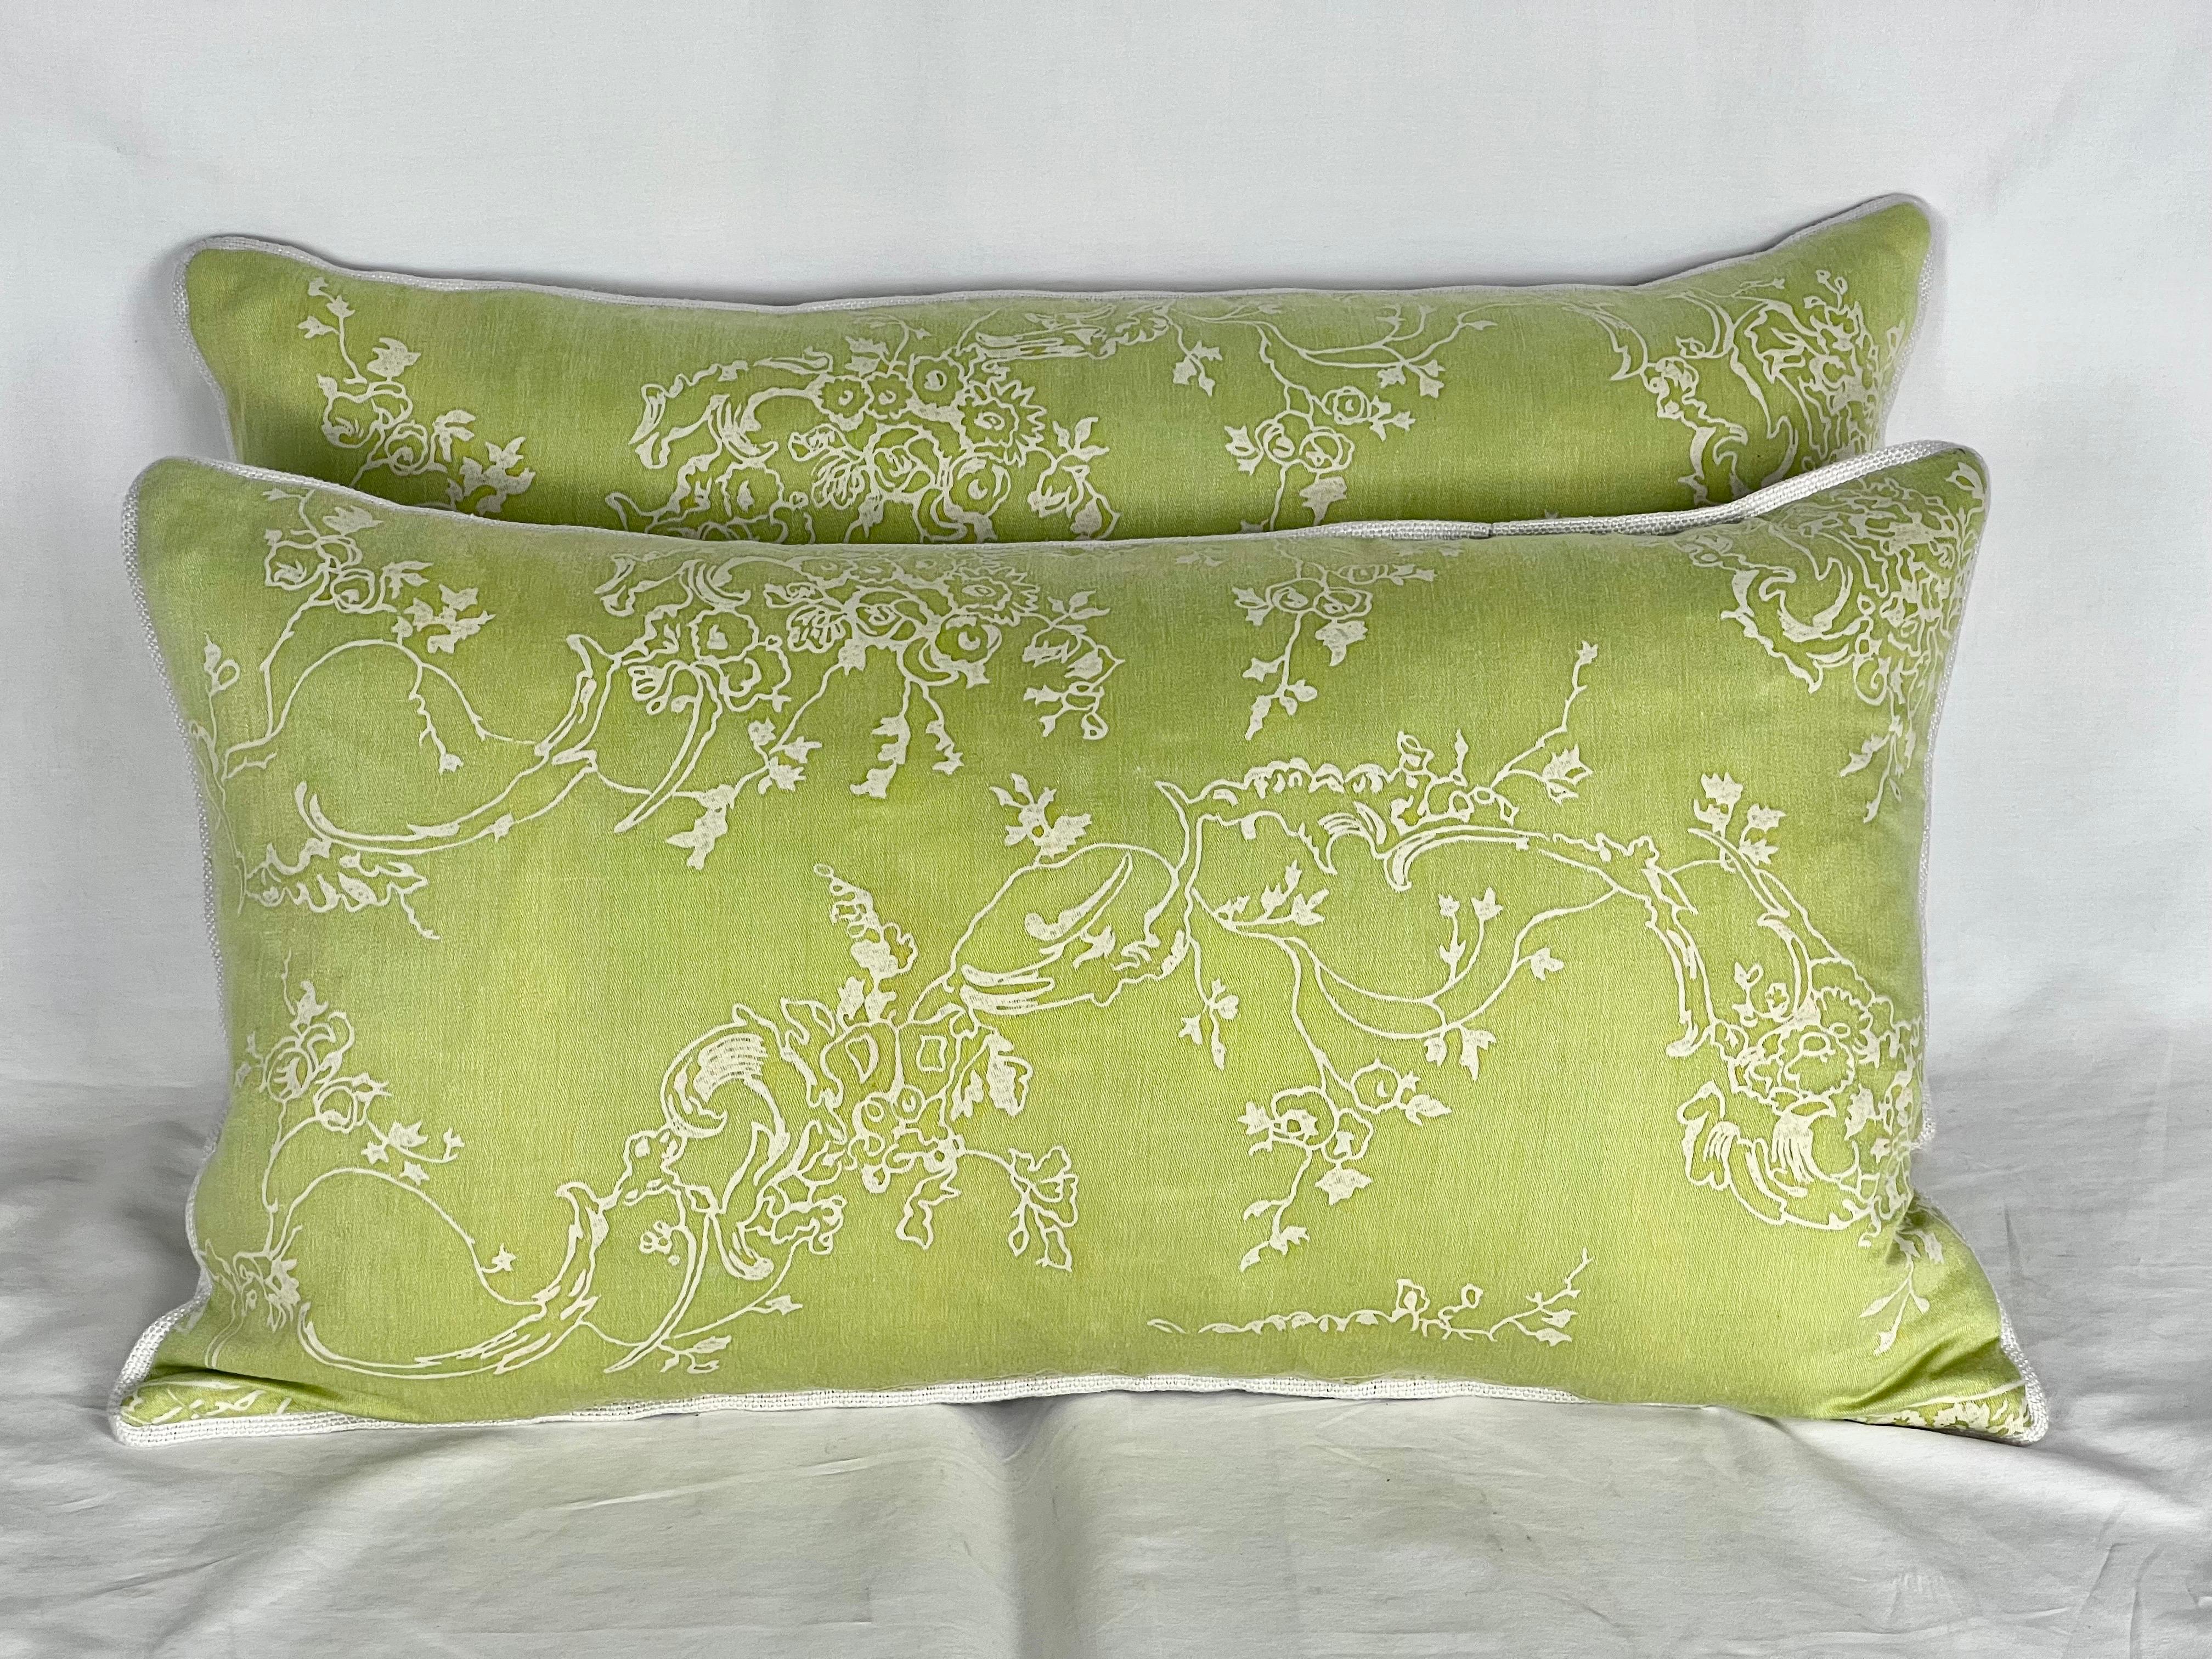 Pair of custom pillows made with remnants of early 20th century Venezianina patterned Fortuny in Sulphur green & antique white fronts. Textured Belgium linen backs. Down inserts, zipper closures.